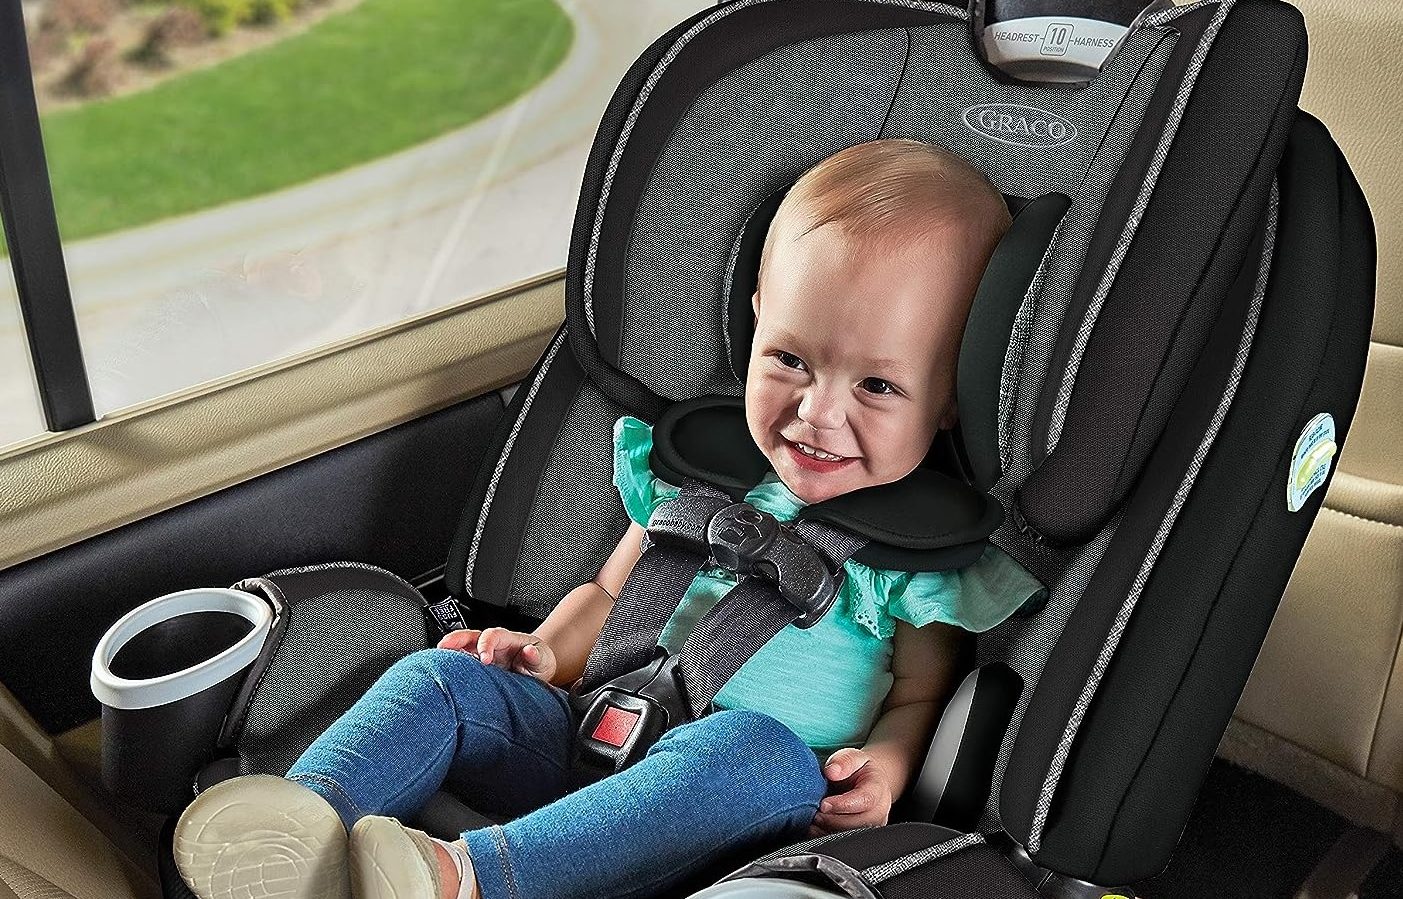 Save Big on Graco Car Seats With These Prime Day Deals